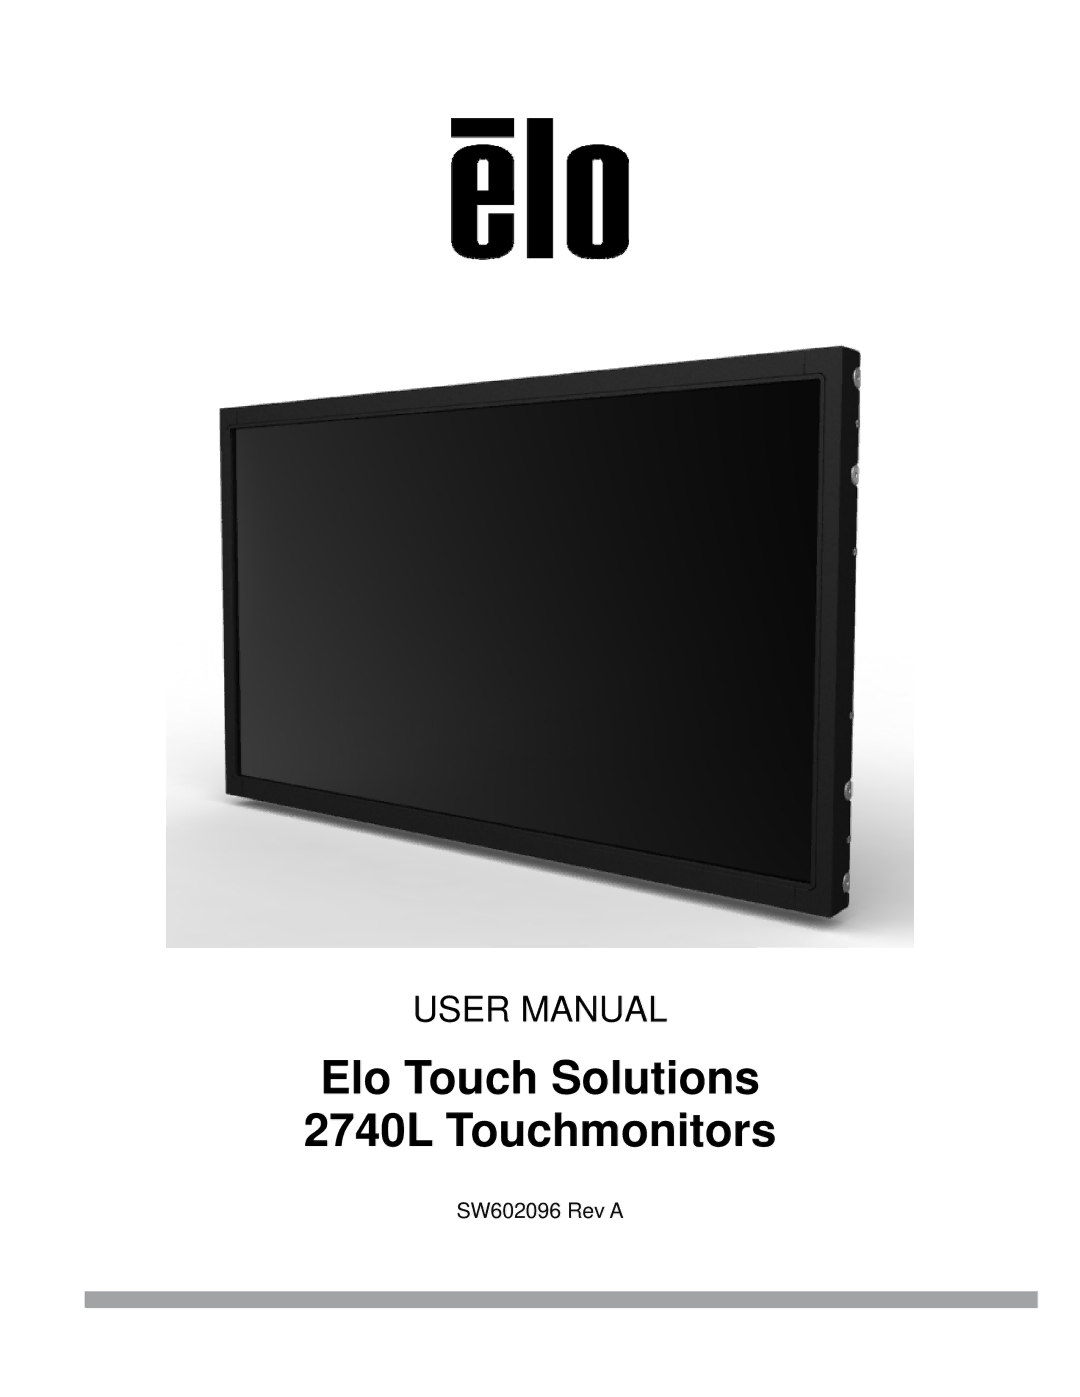 Elo TouchSystems user manual Elo Touch Solutions 2740L Touchmonitors 